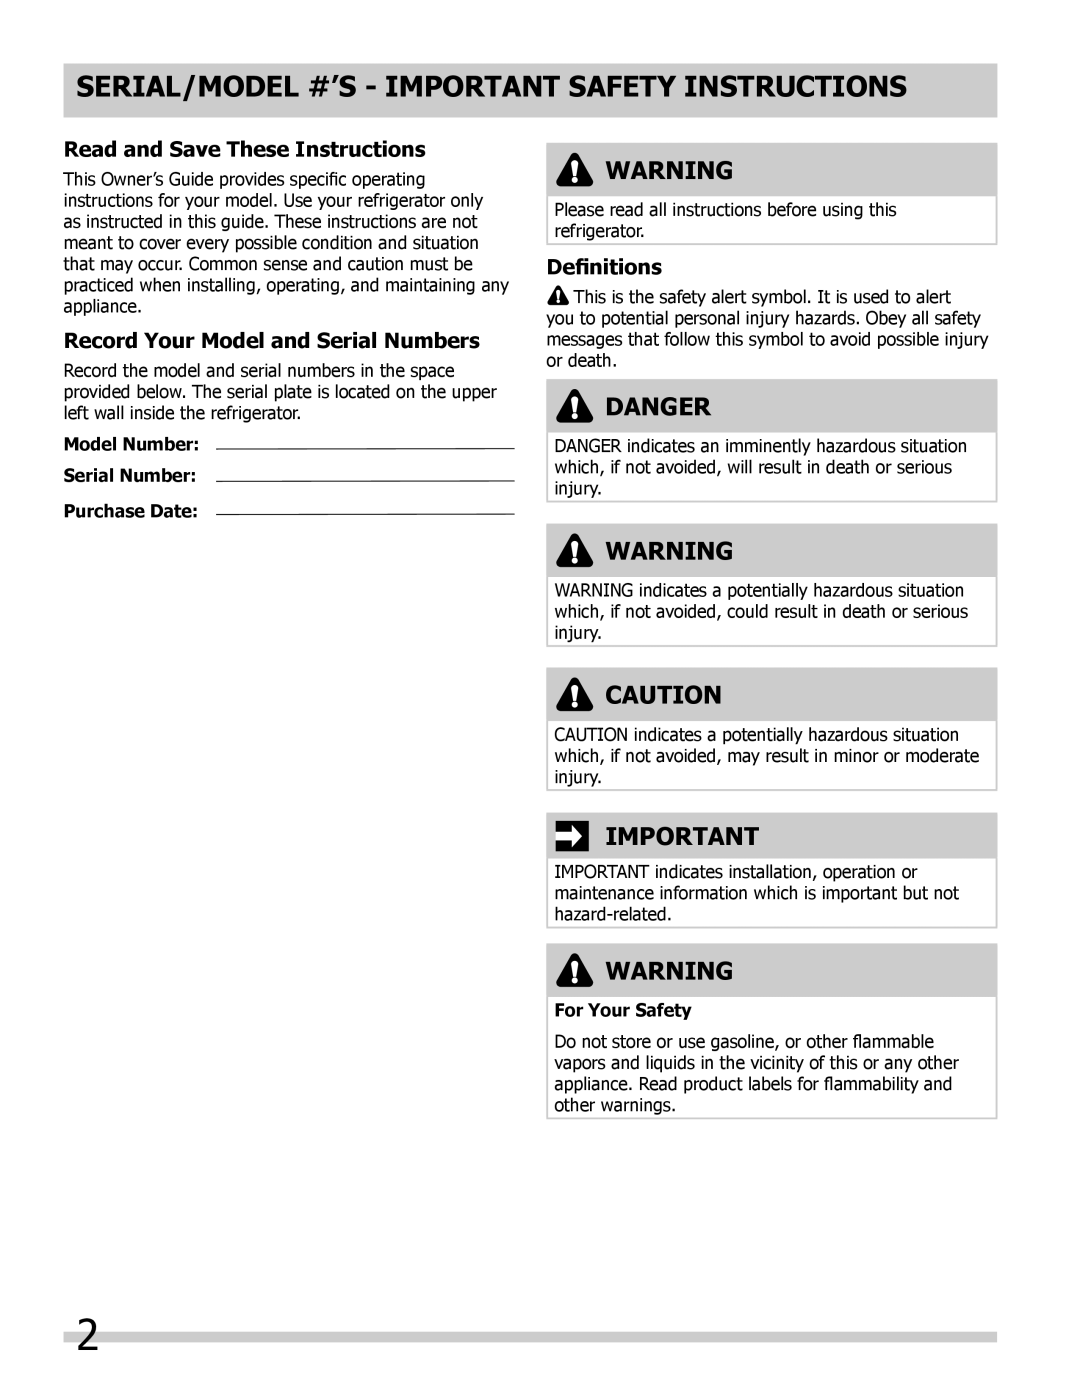 Frigidaire FFHT10F2LW SERIAL/MODEL #’S - Important Safety Instructions, Danger, Read and Save These Instructions 